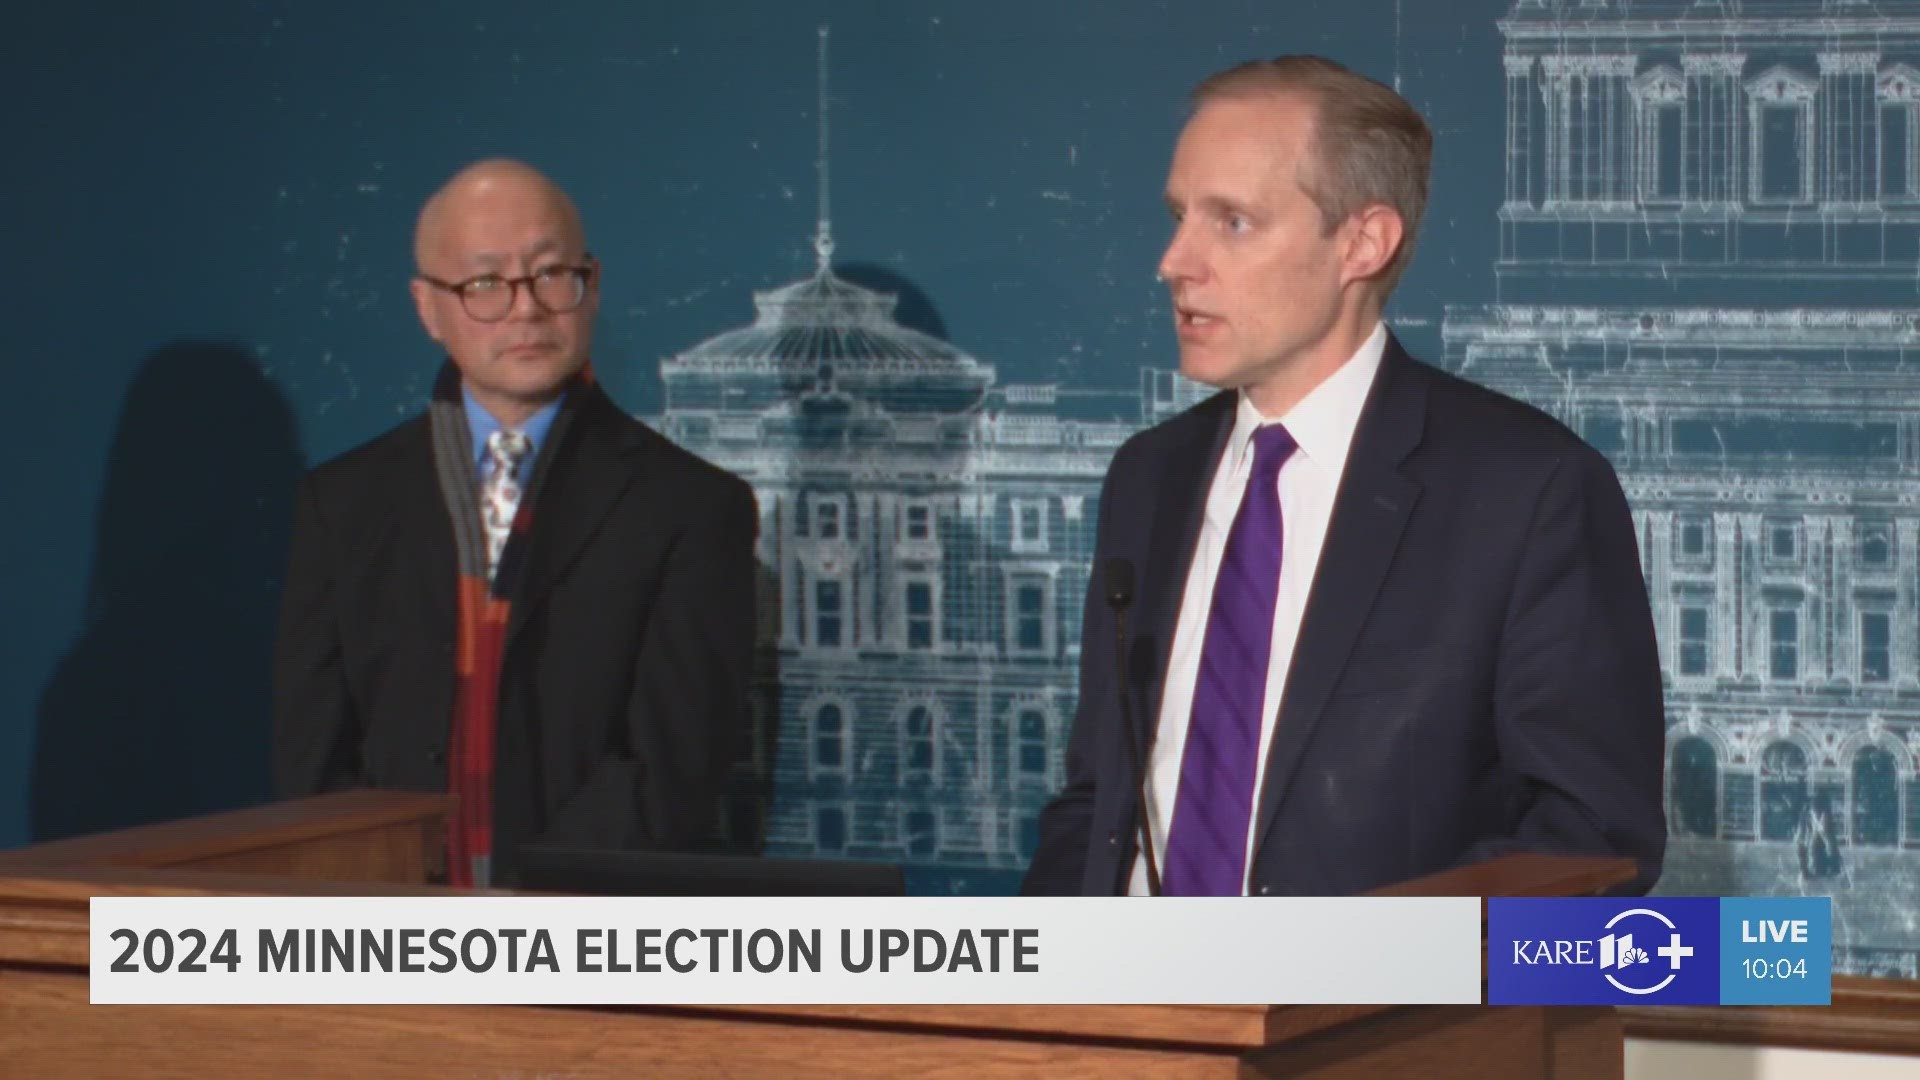 Minnesota Secretary of State Steve Simon says his office is prepared to deal with challenges ranging from disinformation and AI to intimidation at the polls.